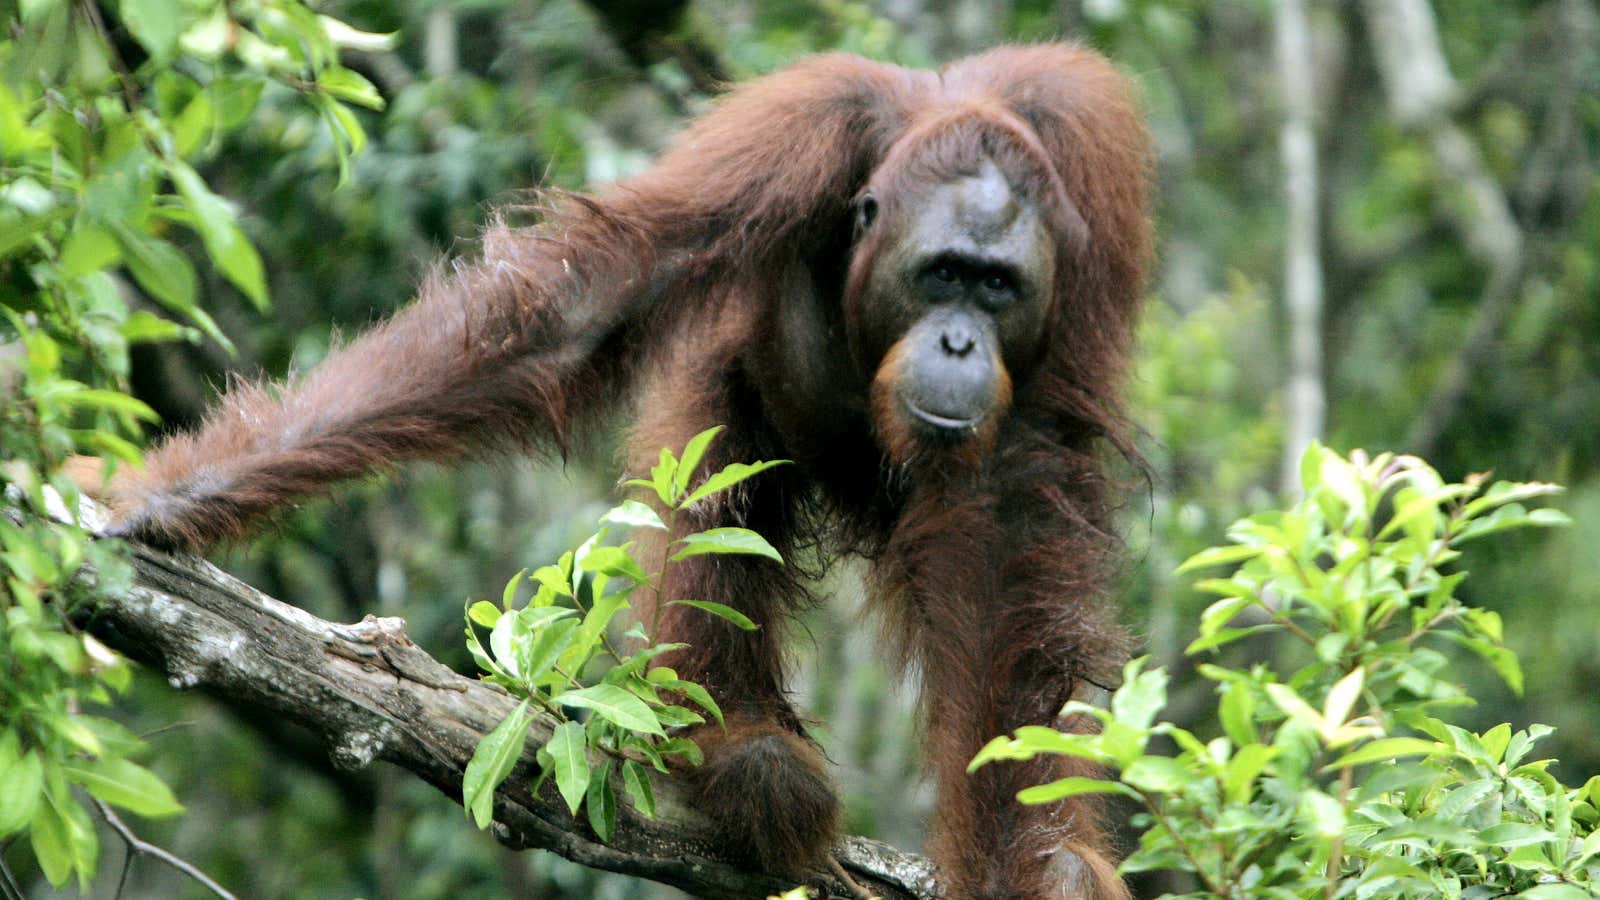 Deforestation for palm oil plantations is threatening one of our closest relatives.